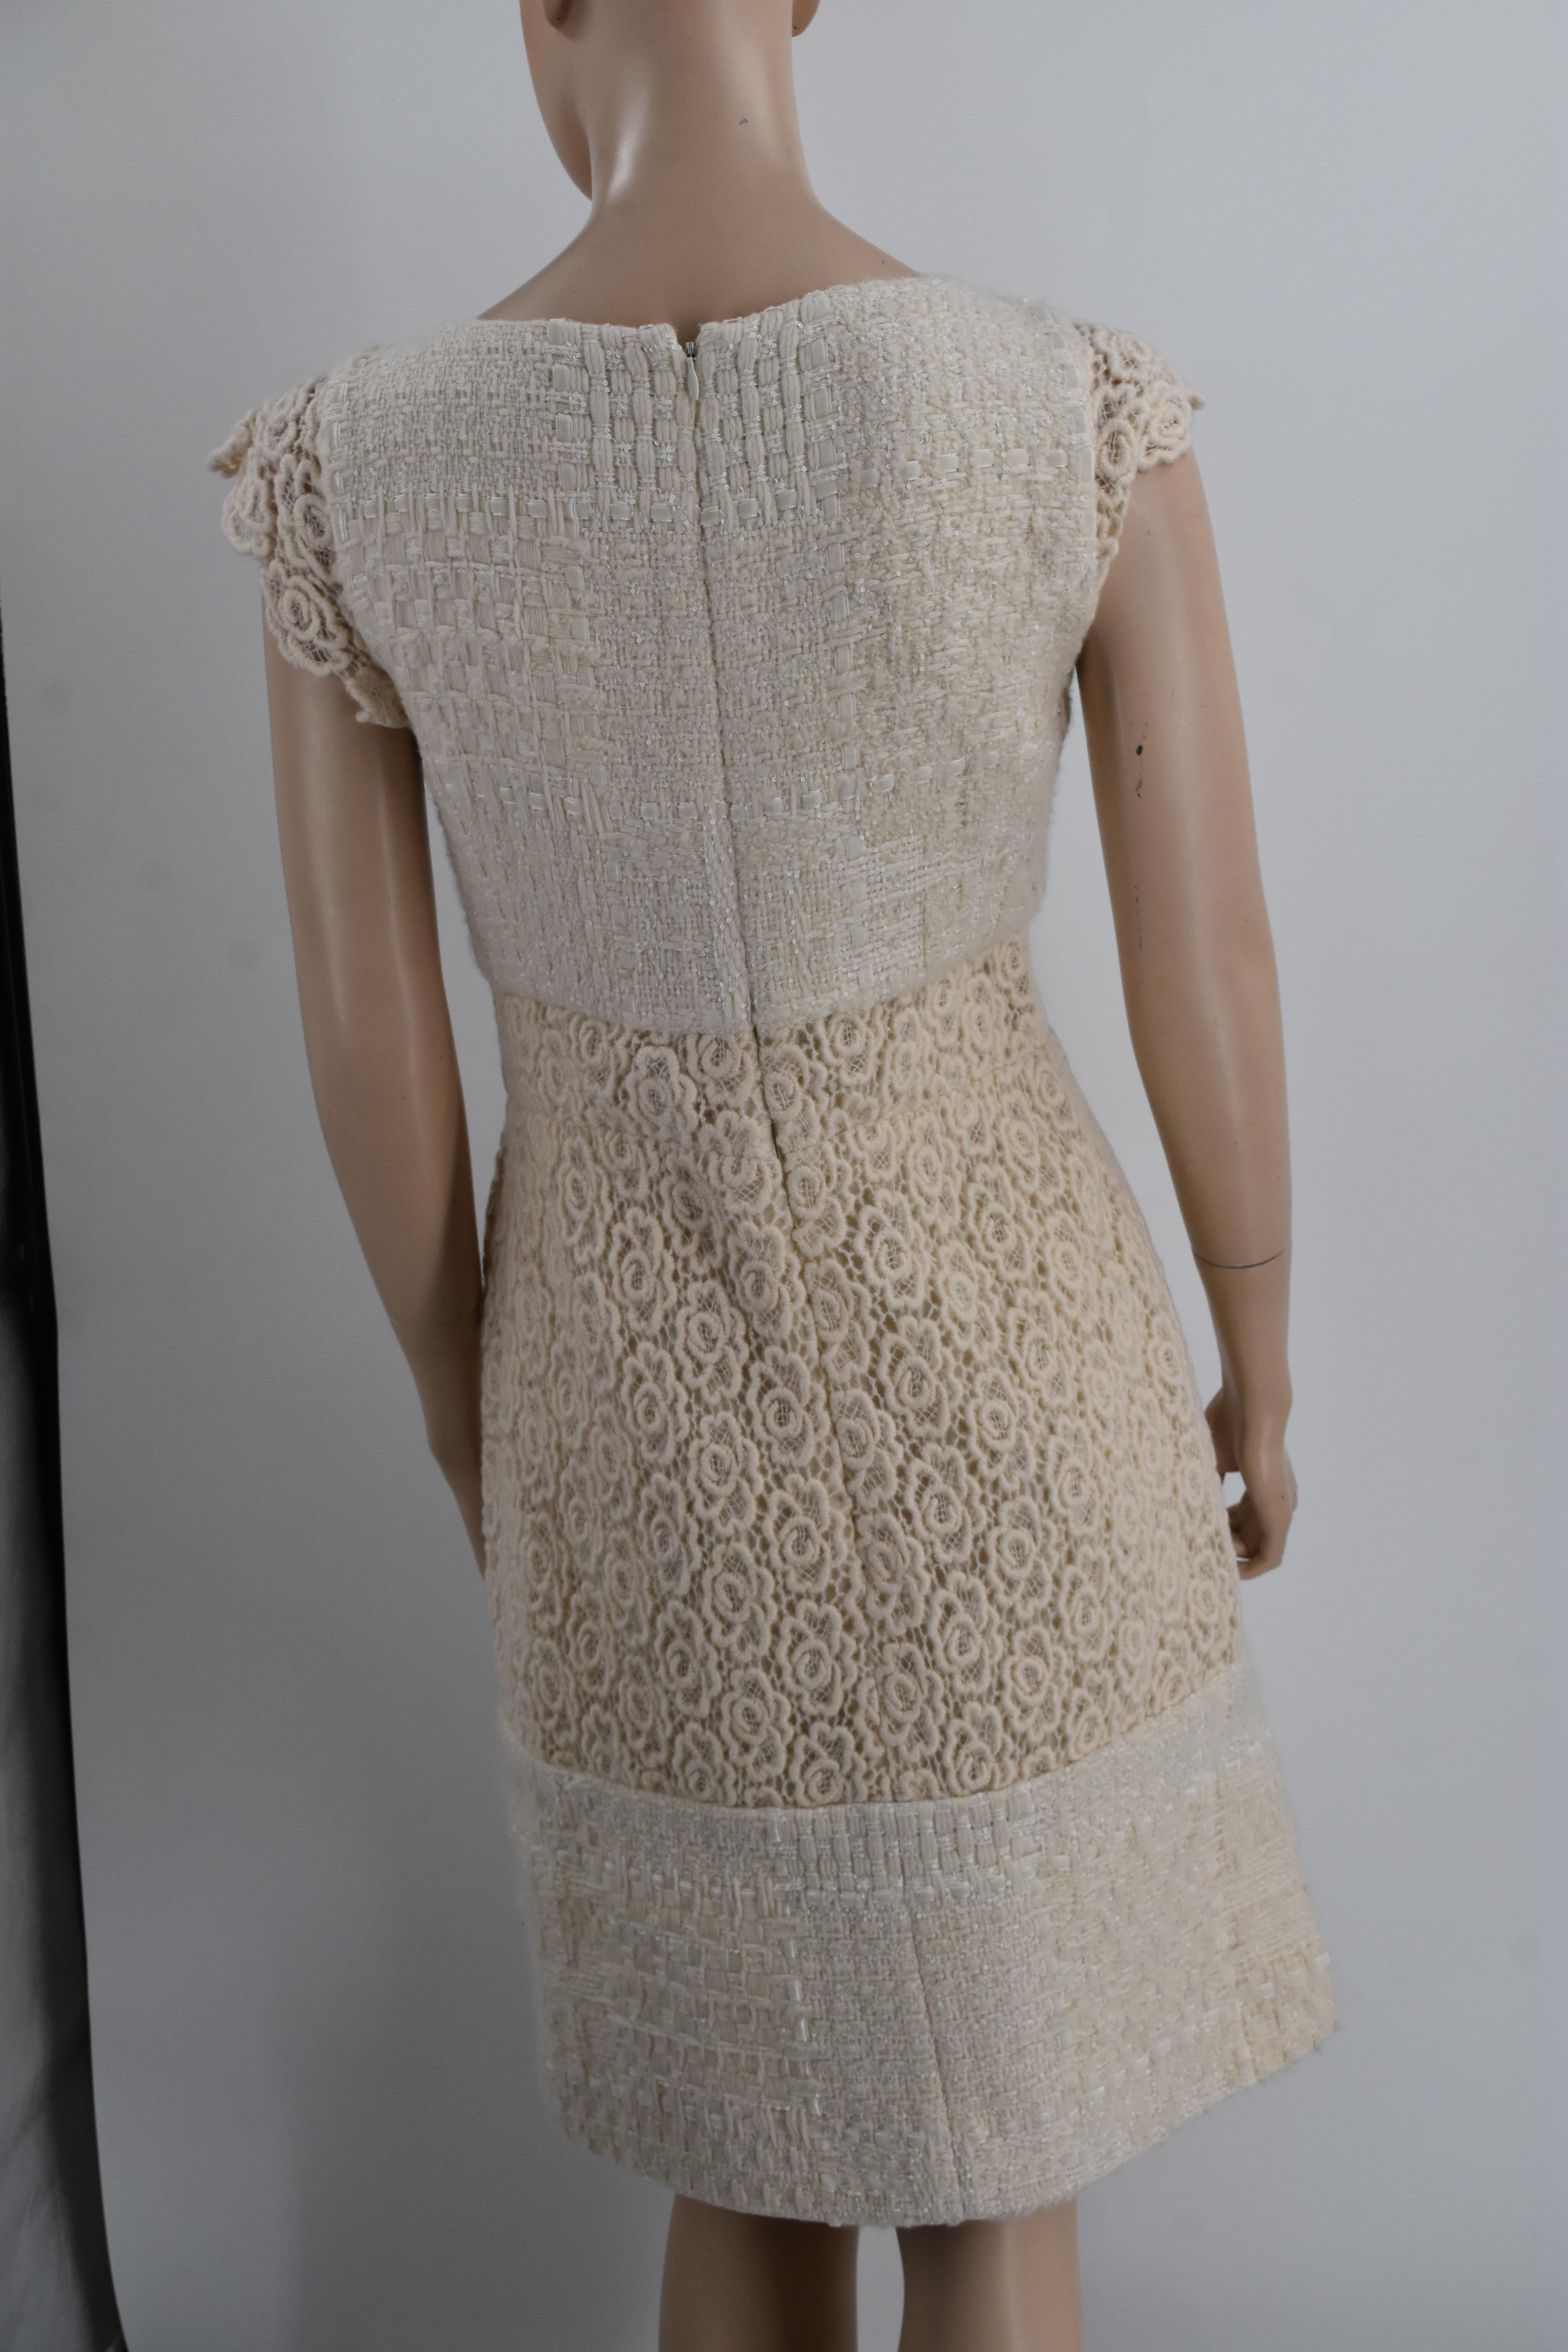 Chanel New with Tag 15A 2015 Cashmere Runway Dress 38 Fabric Swatch In New Condition For Sale In Merced, CA